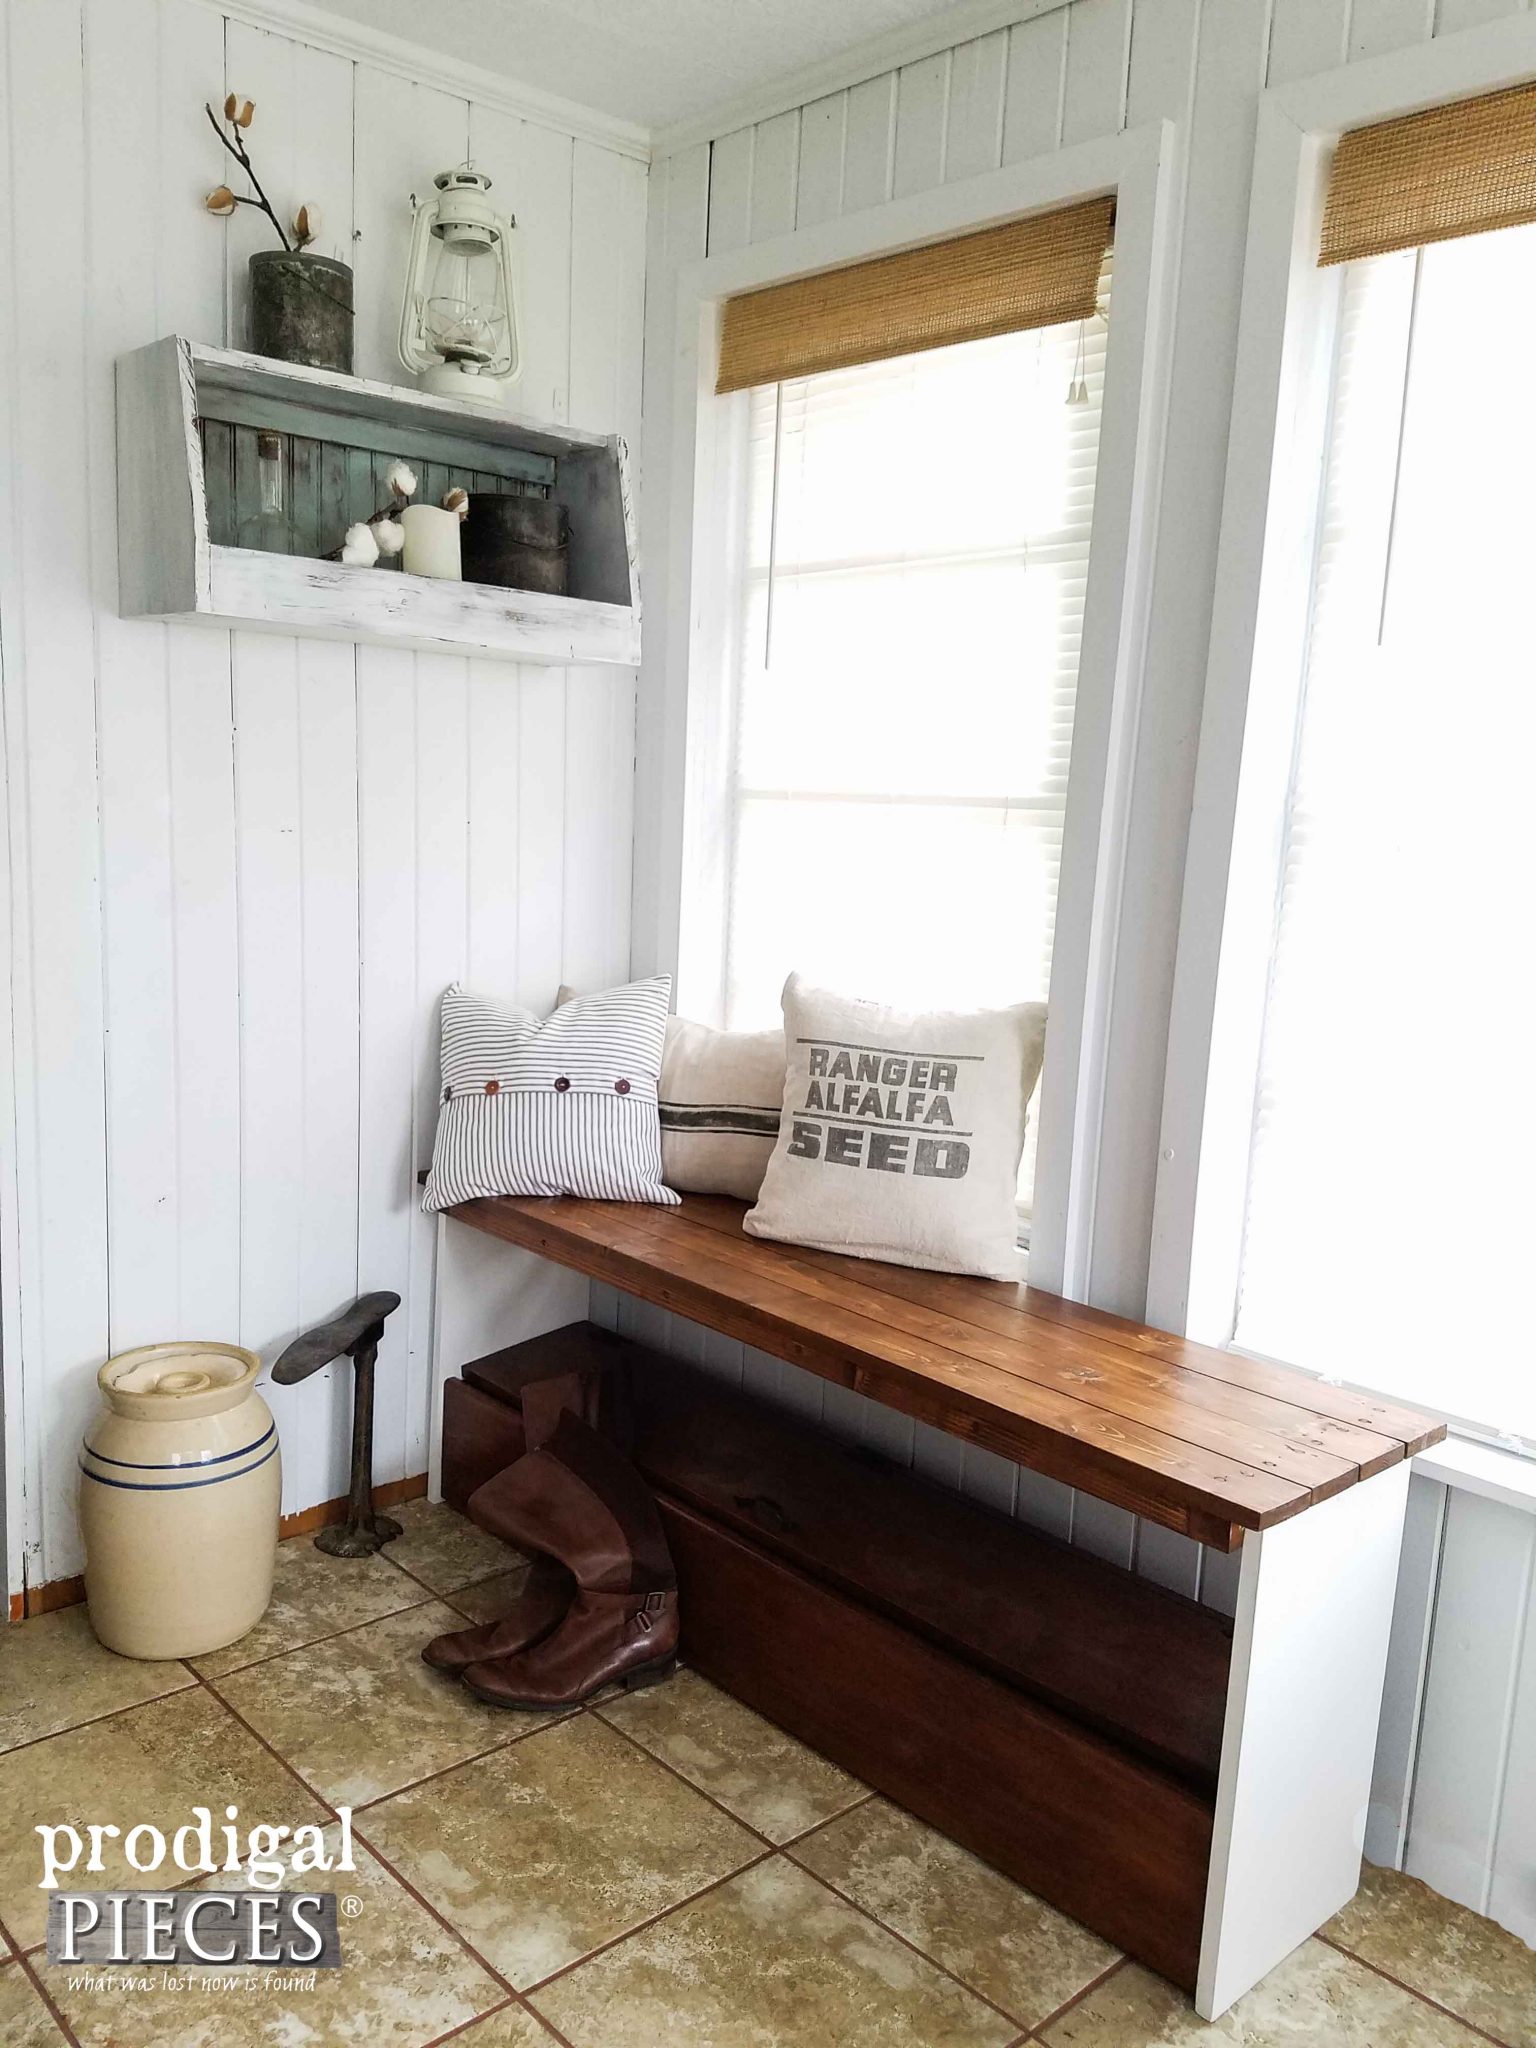 Rustic Repurposed Headboard Bench & Wall Shelf by Prodigal Pieces | prodigalpieces.com